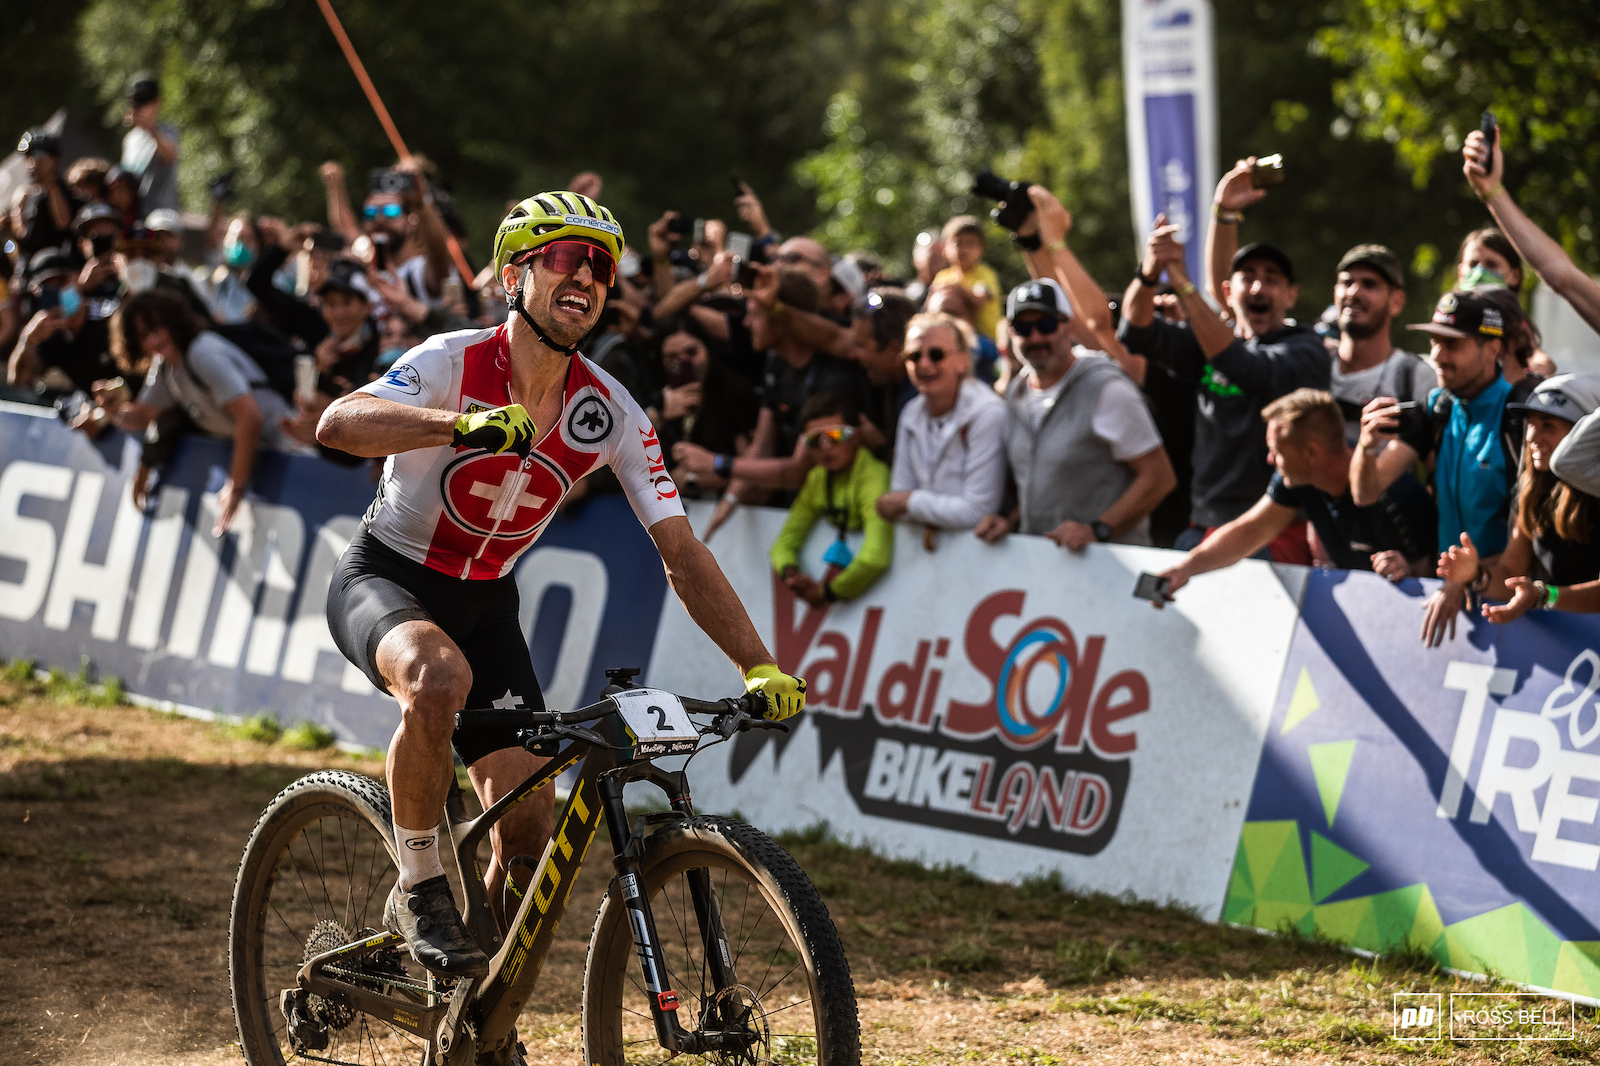 This one might feel even sweeter than the others given Nino Schurter is winless in the World Cups this year.